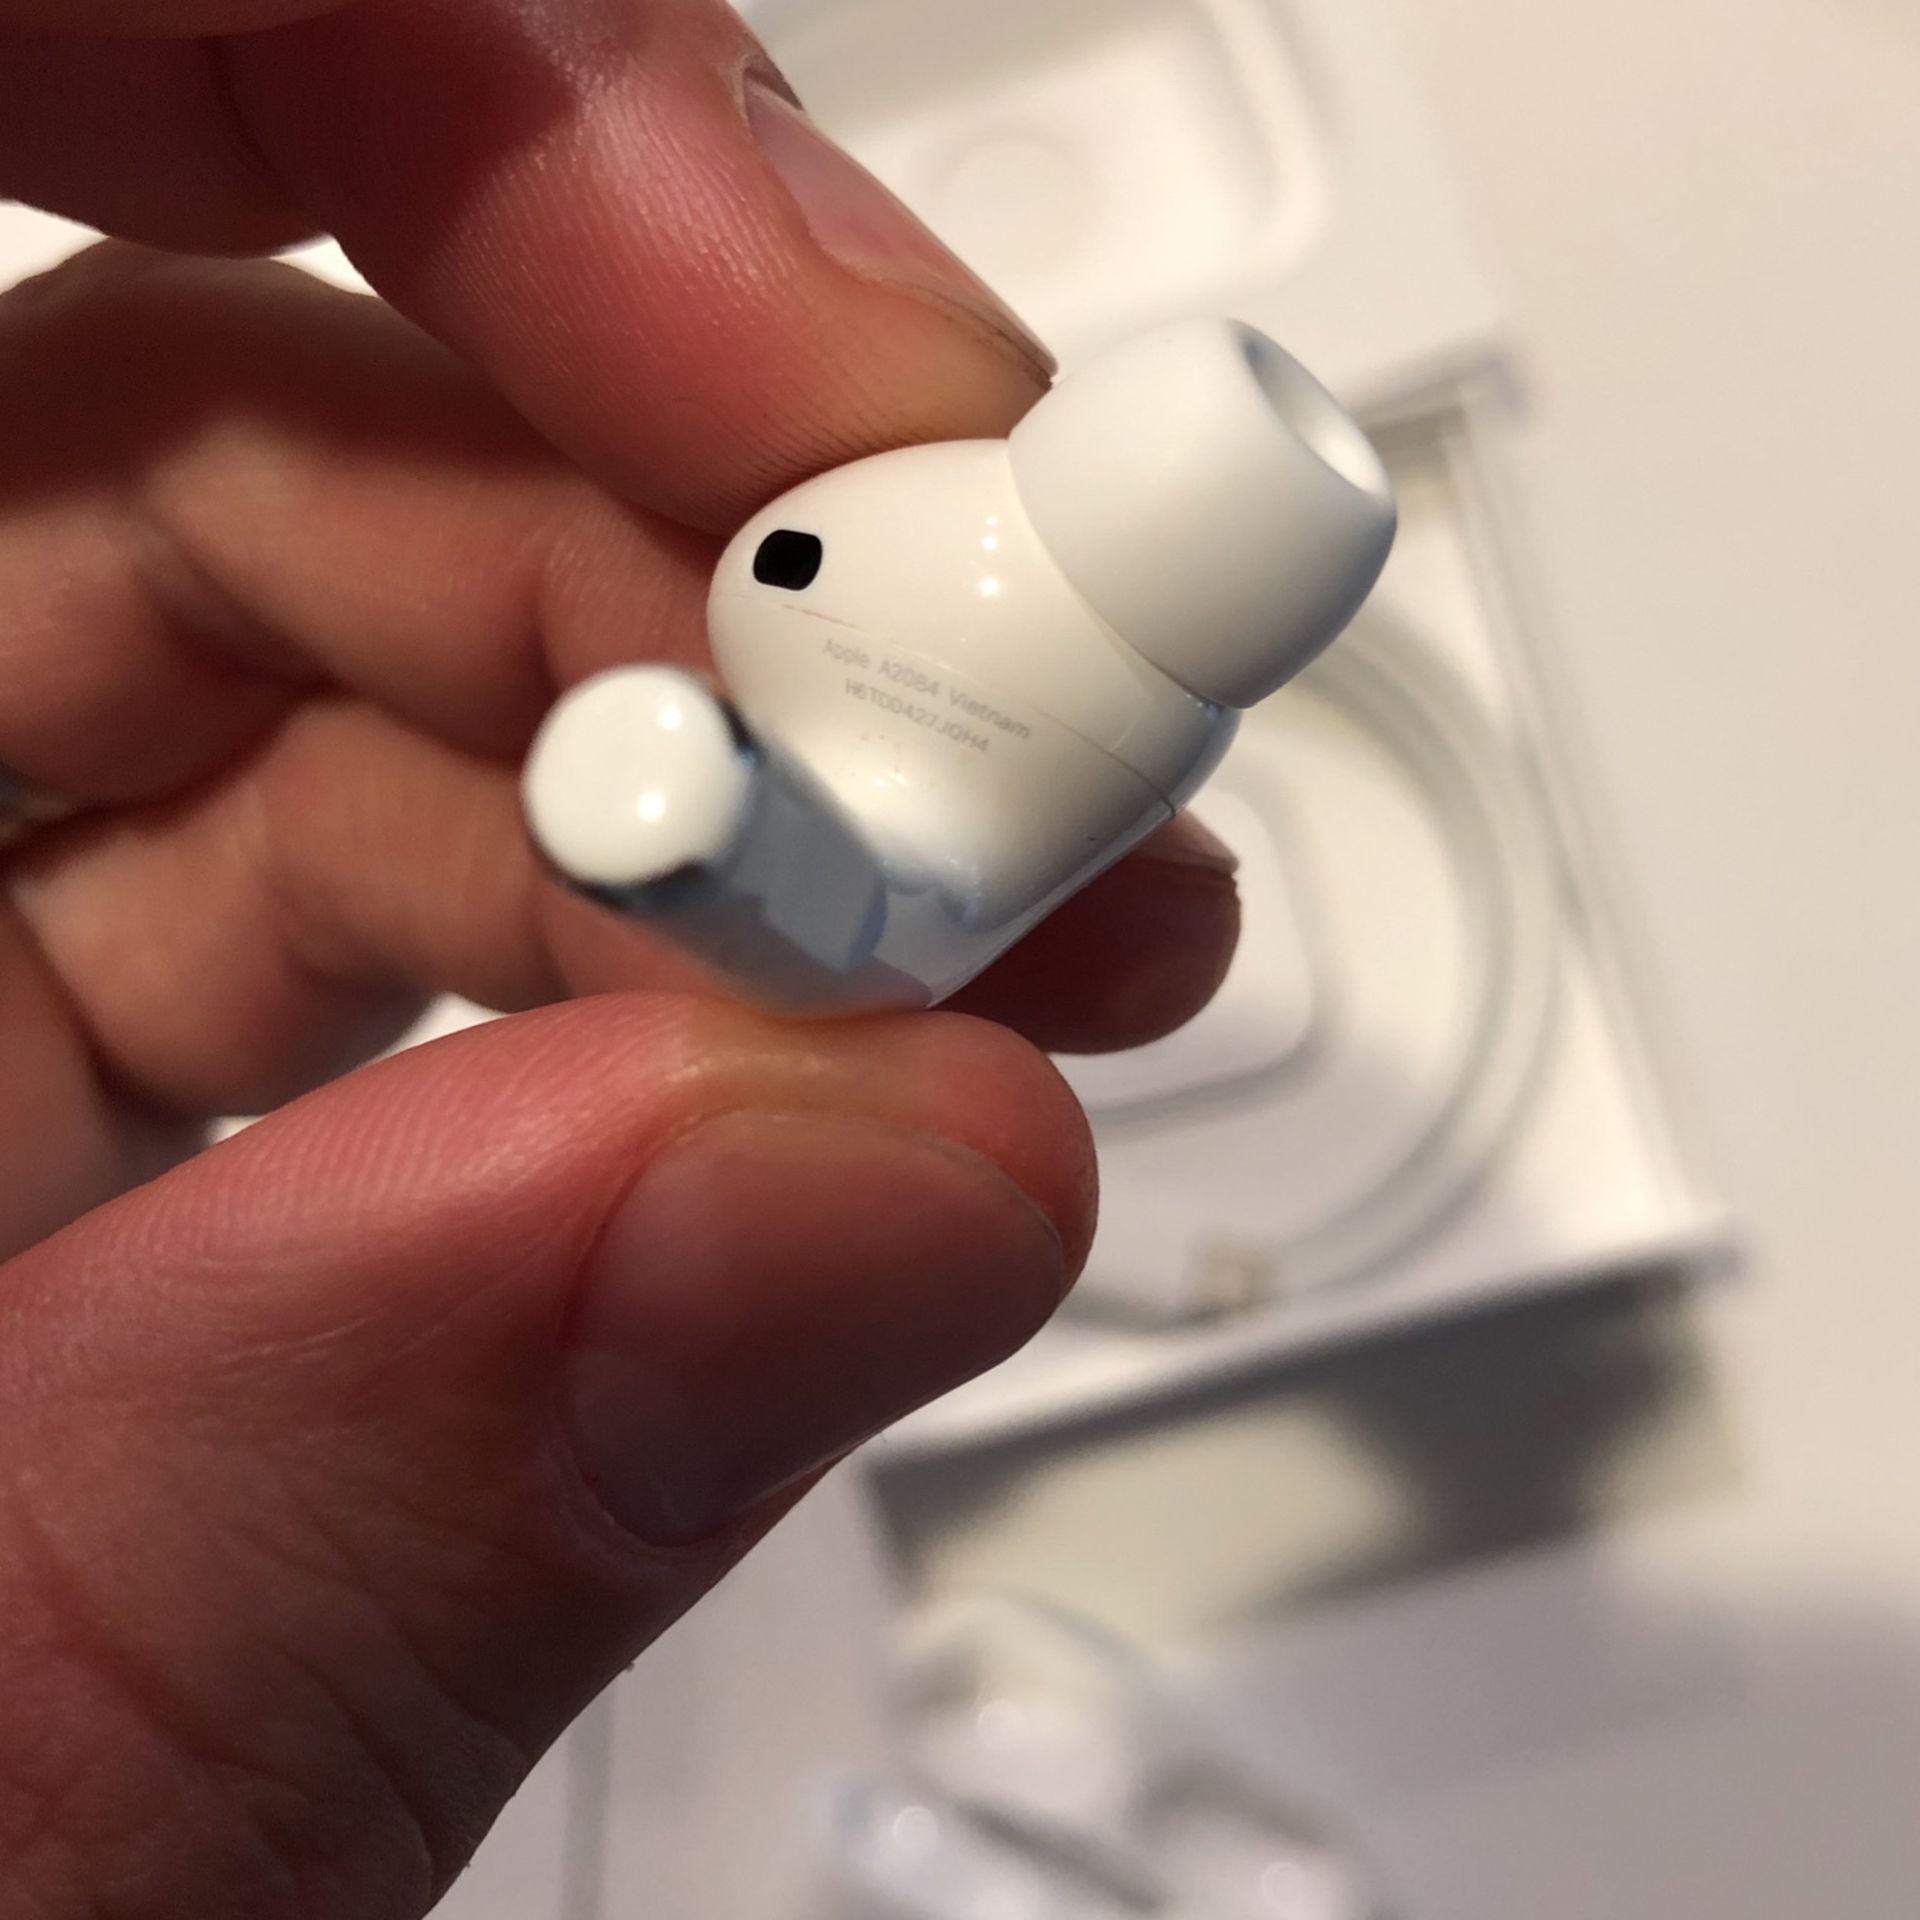 AirPods Pro Wireless Charging Case - MWP22AM/A for Sale in Downers 